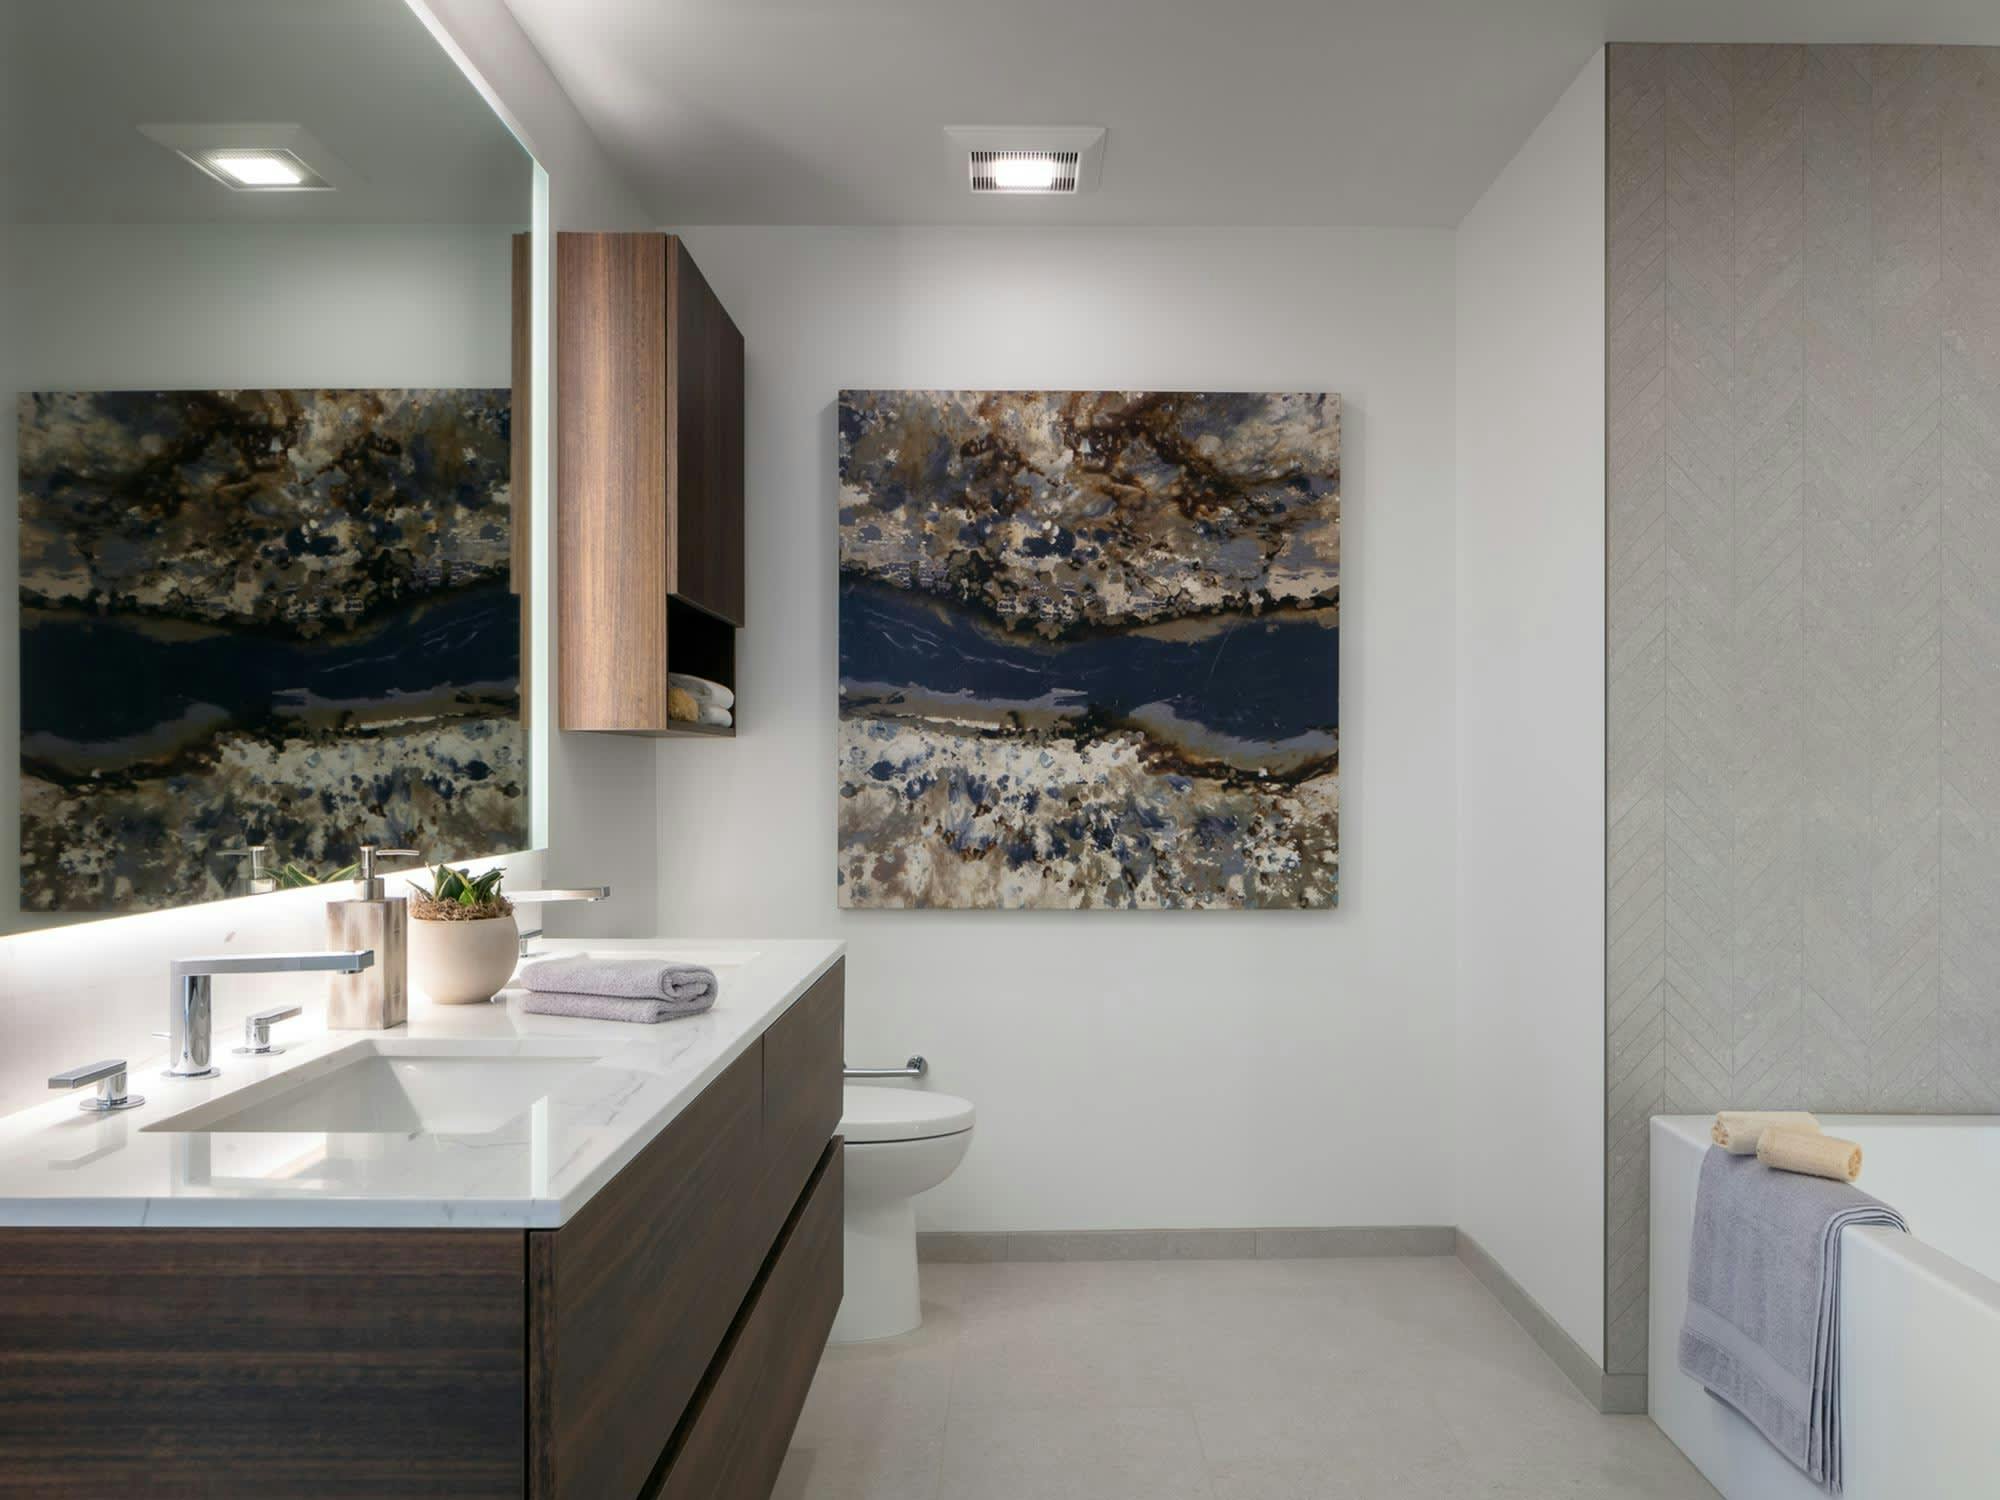 The bathrooms for residences are chic, elegant, and contemporary. With floating vanities, marble countertops and Italian tile, they speak of nothing if not designer. Photo courtesy of the MIRA website. 